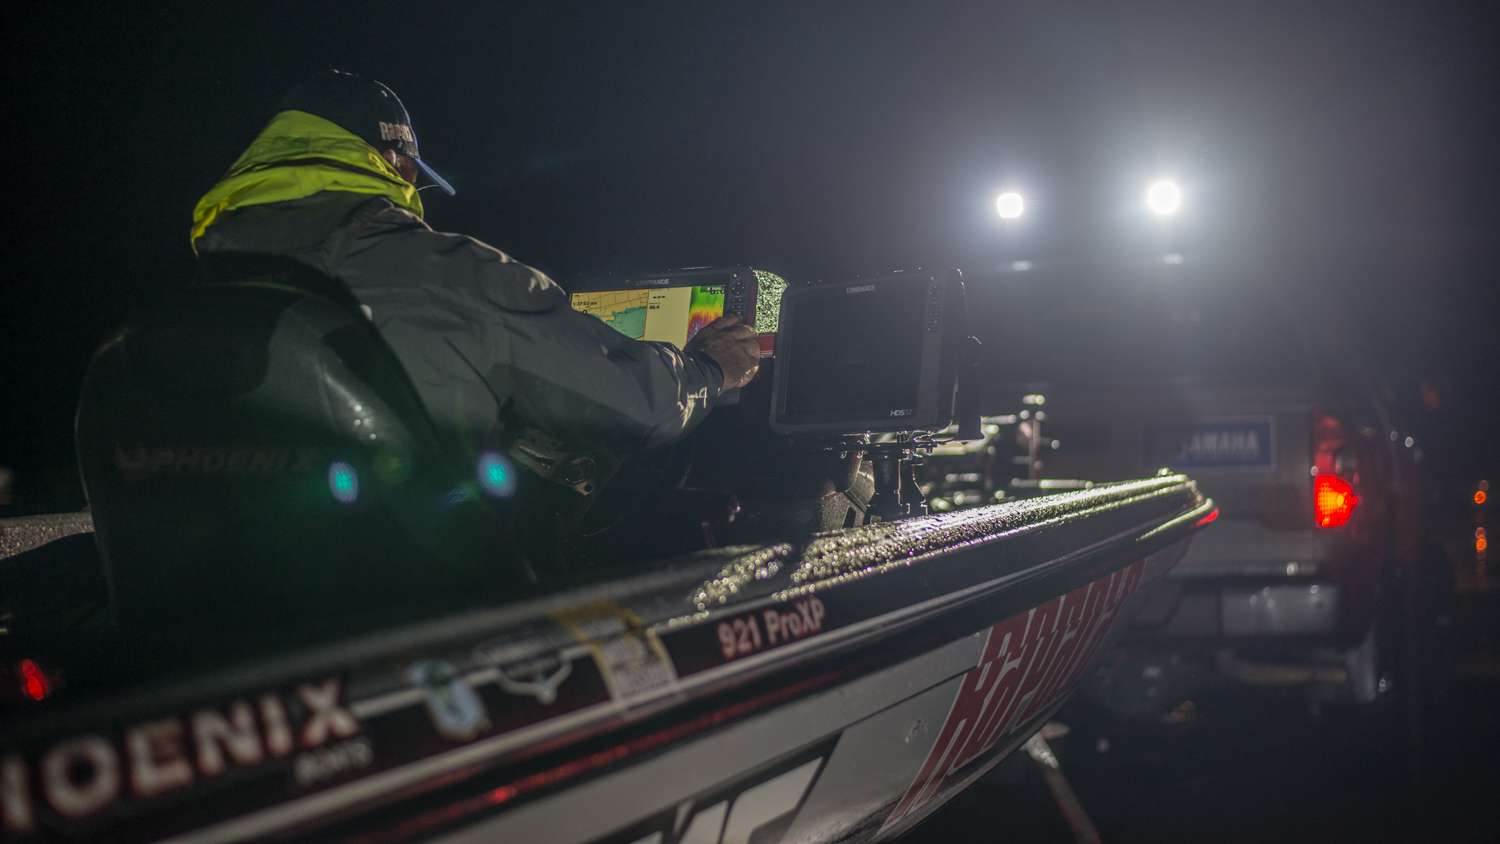 After a soggy Day 2 on the mighty Mississippi River the Bassmaster Elite Series anglers seemed to be moving a little slower, hesitant to hop out of their warm, dry trucks and launch their boats in the rain.